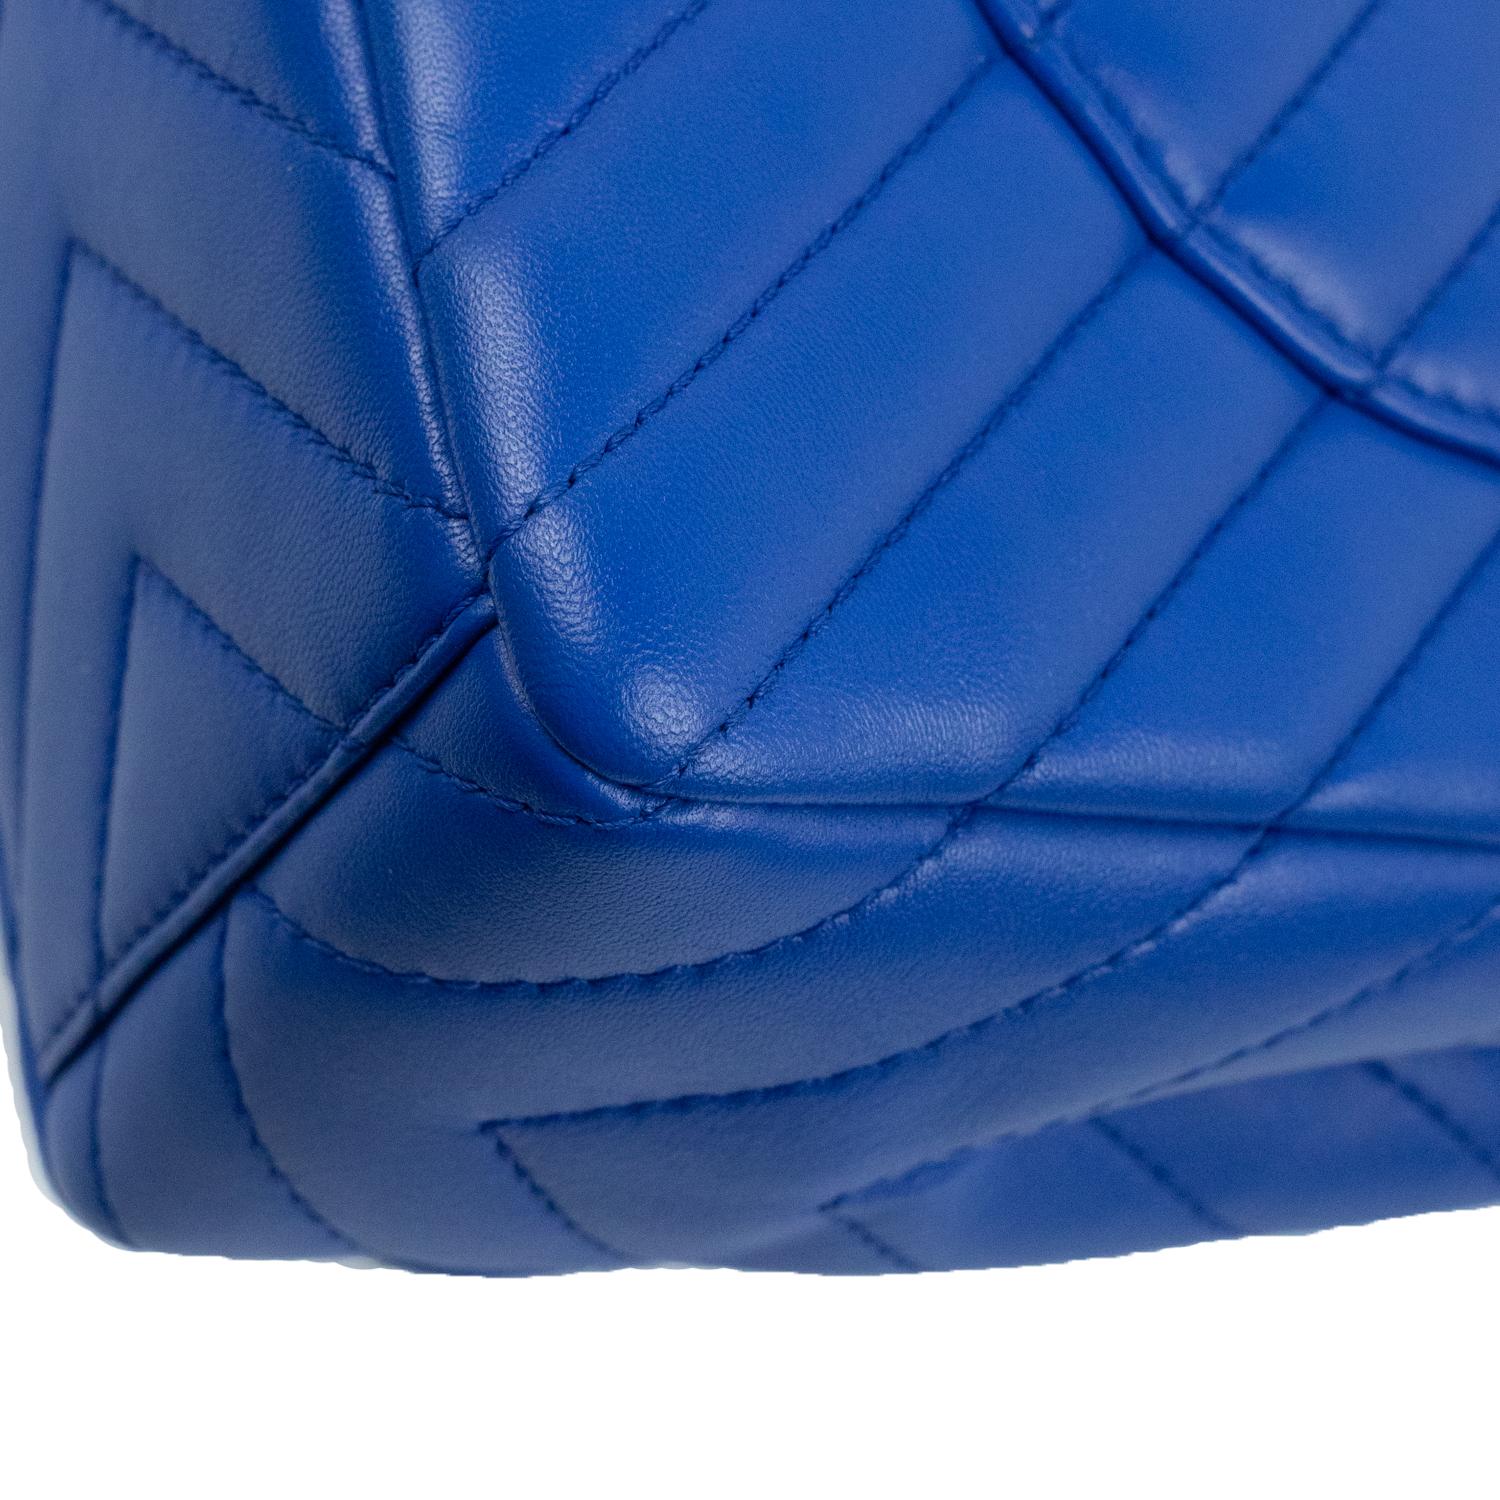 CHANEL, Jumbo in blue leather 7